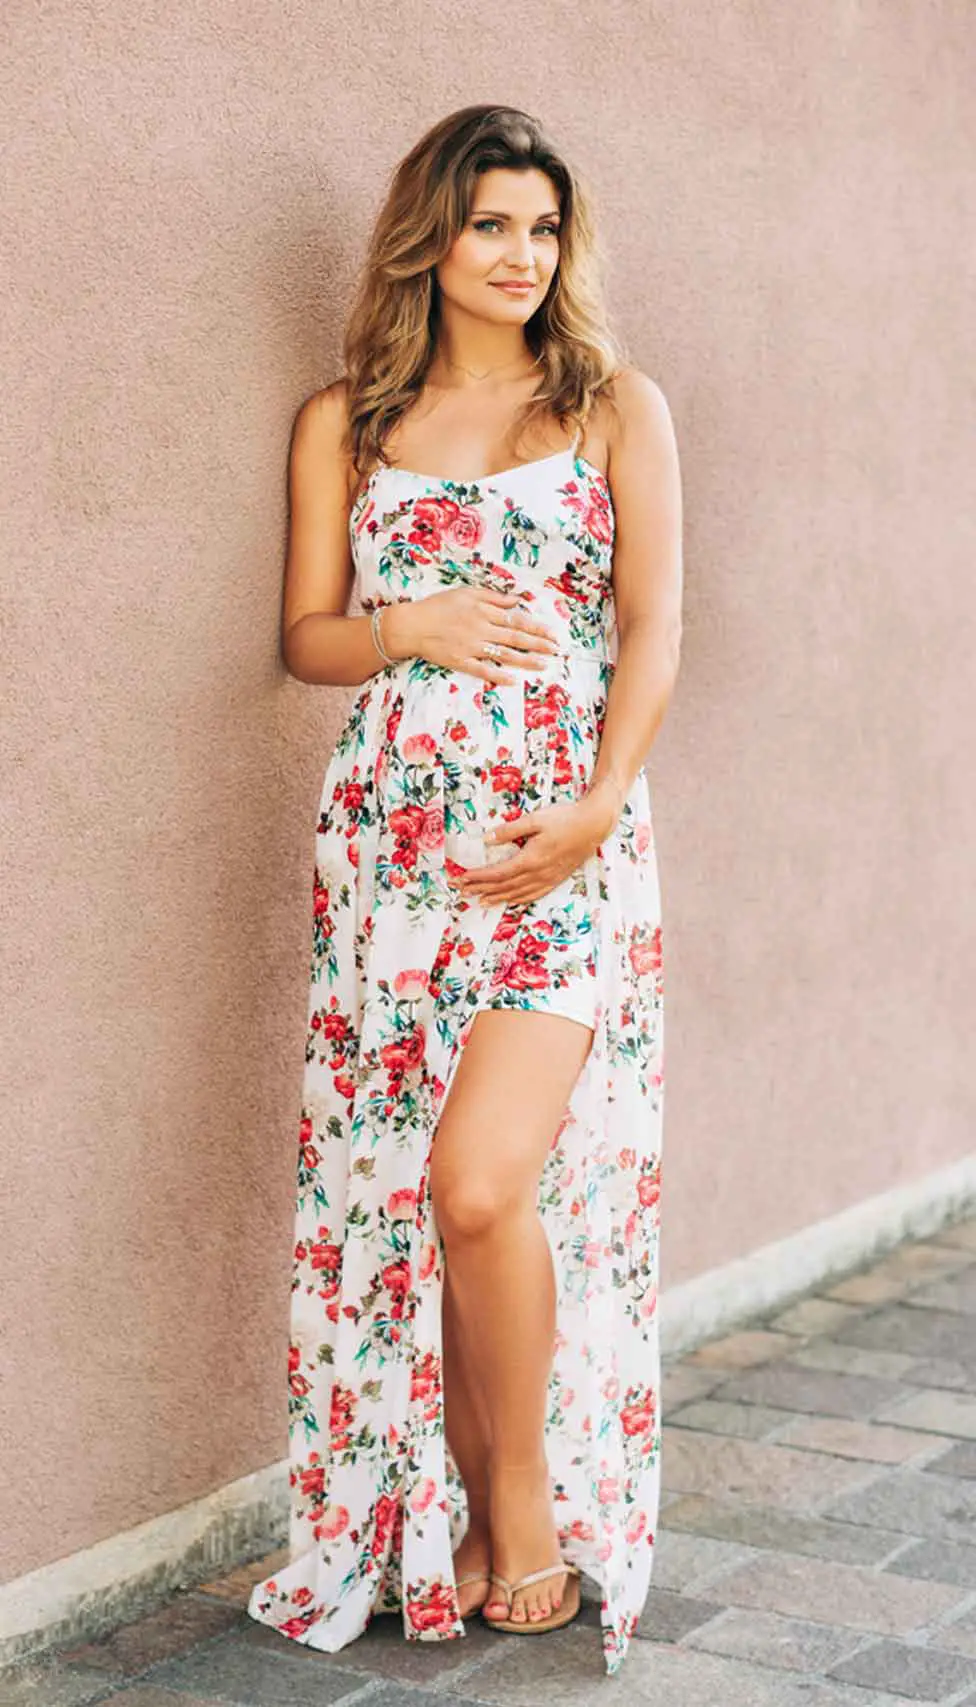 Maxi dress is the safest way to pregnancy fashion